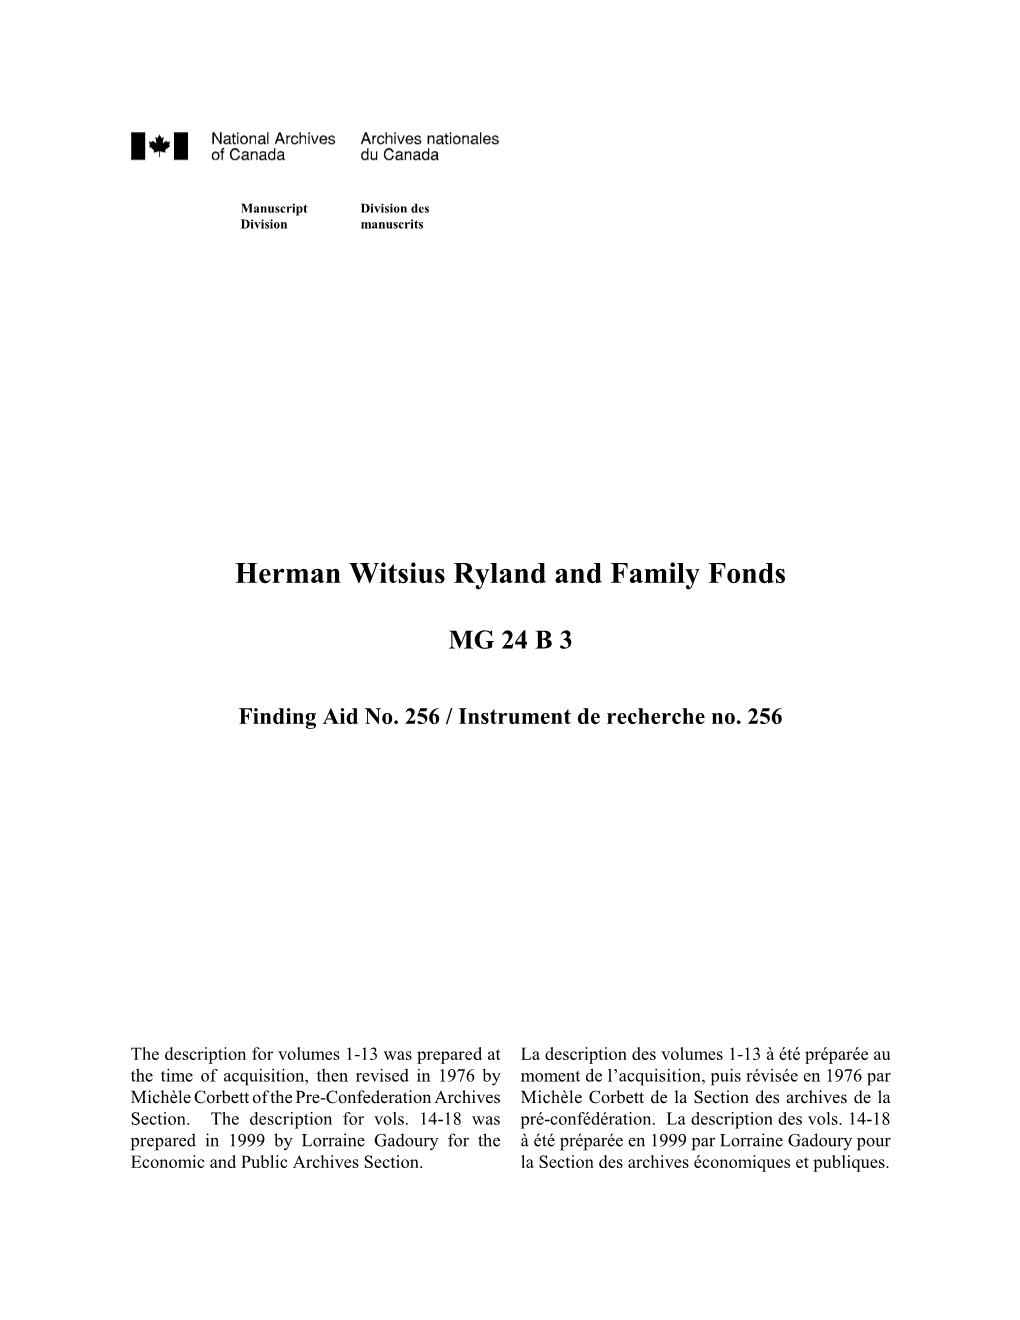 Herman Witsius Ryland and Family Fonds